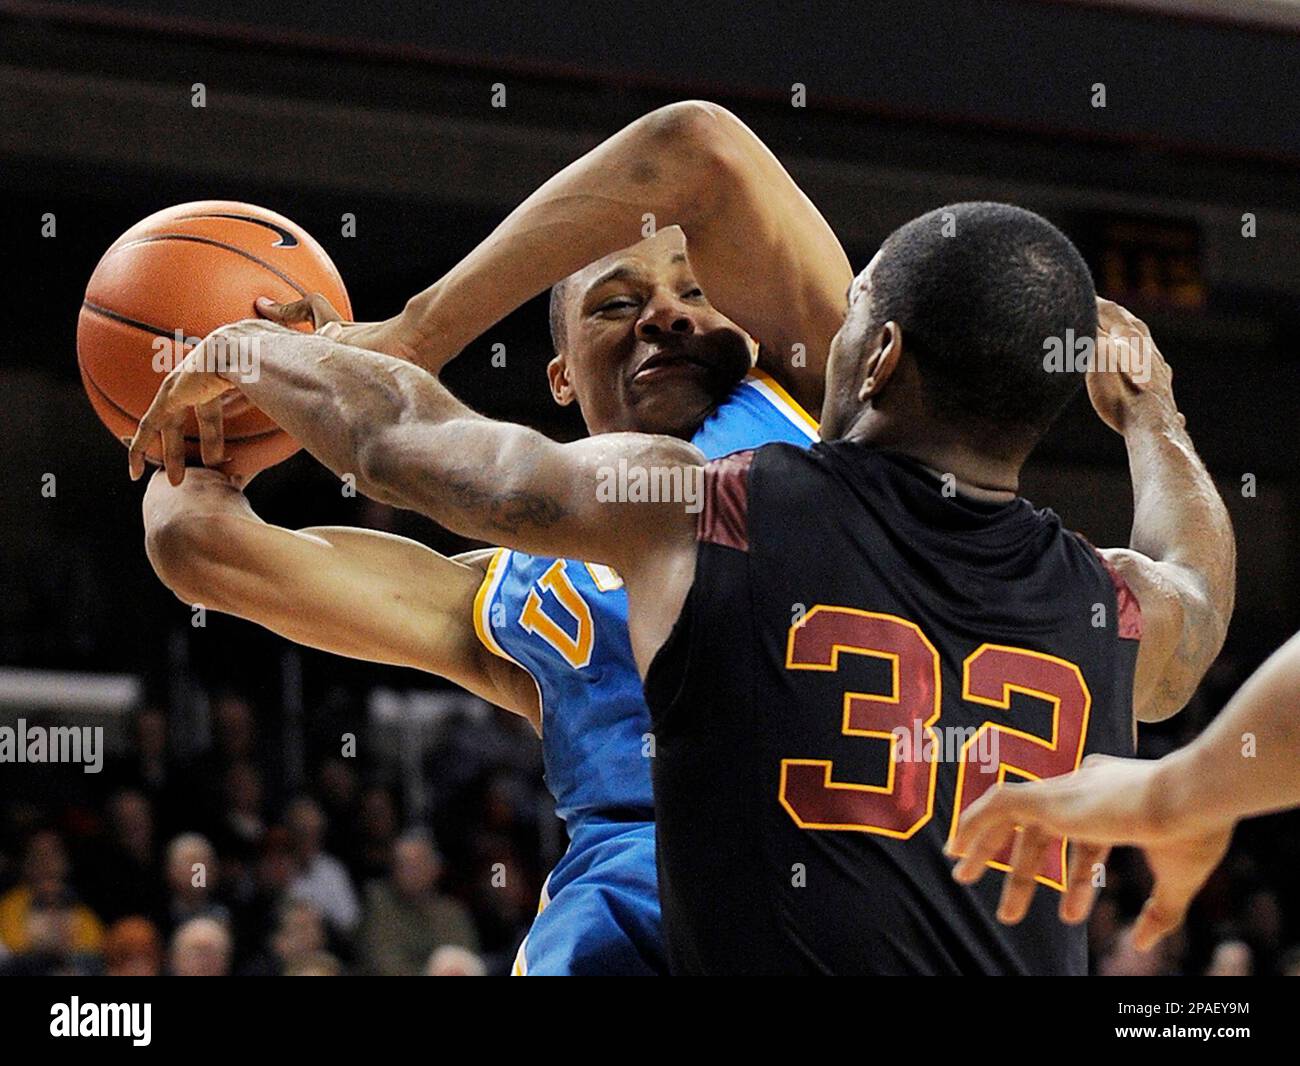 UCLA's Russell Westbrook dunks the ball during the second half of